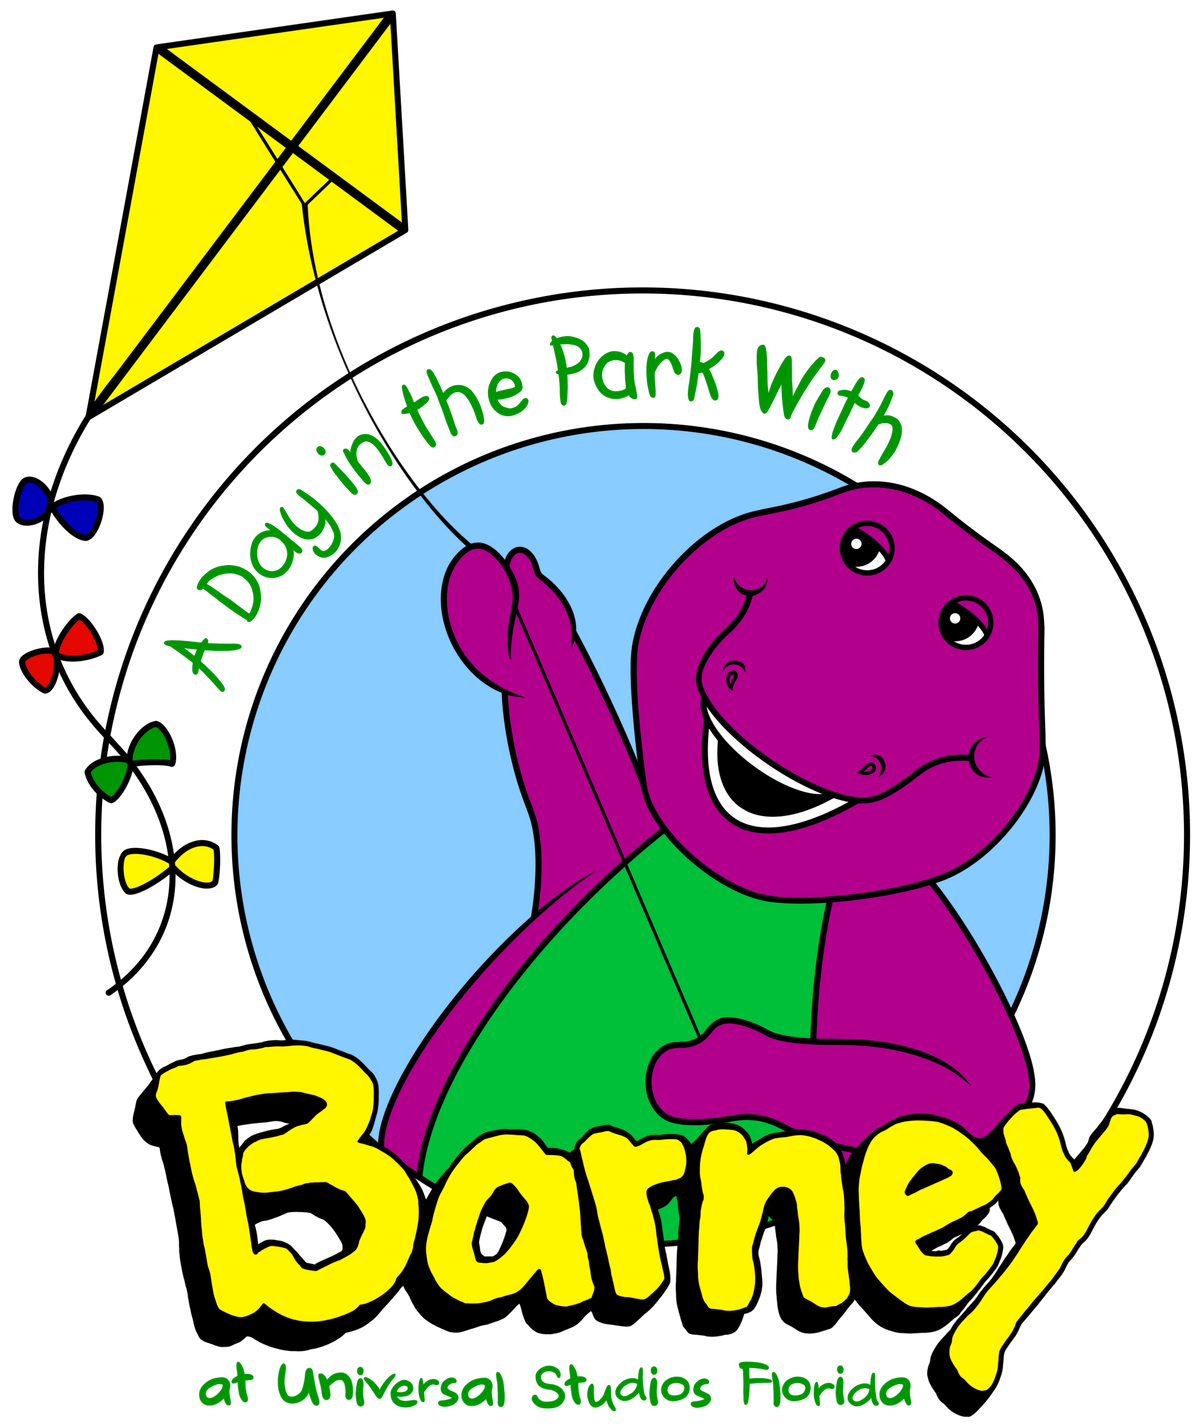 A Day In The Park With Barney Logopedia Fandom